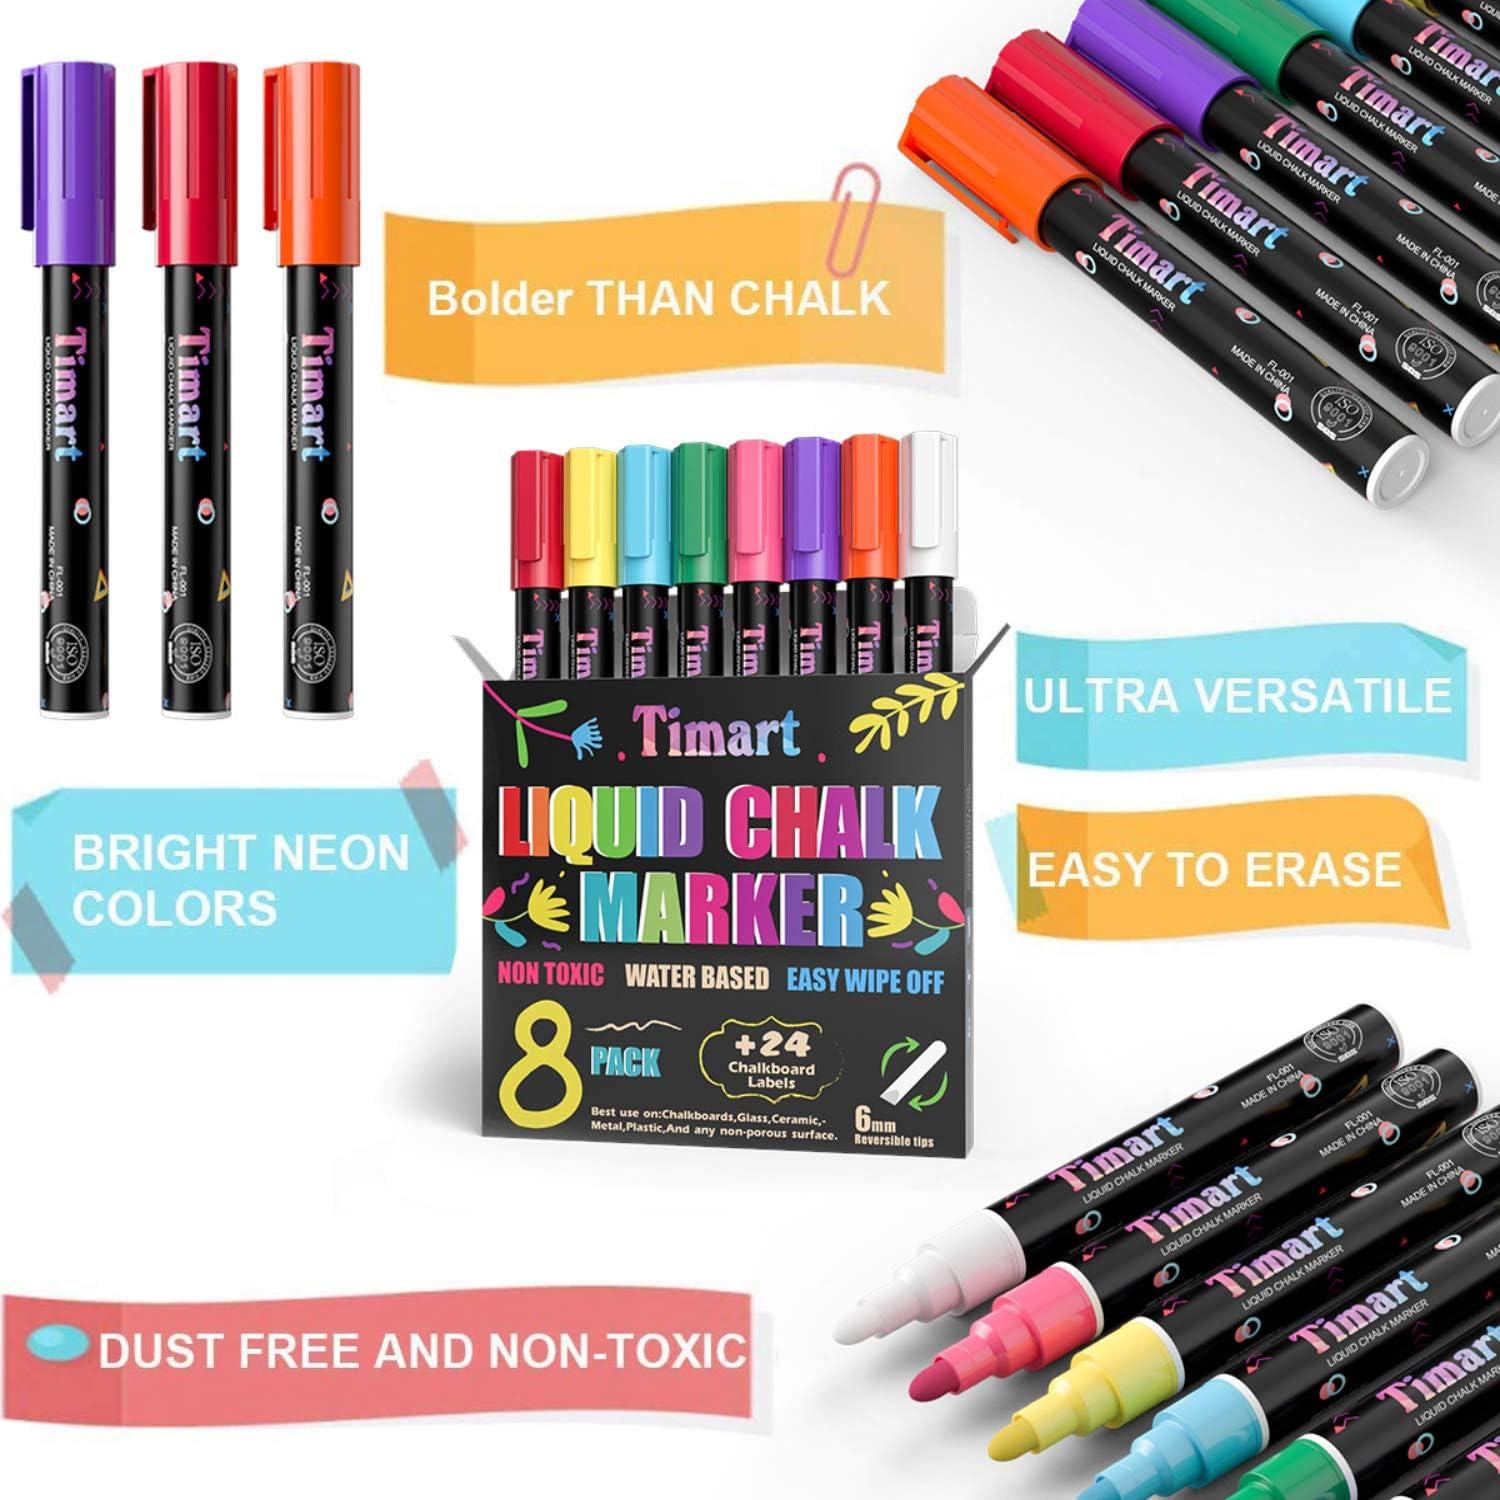 Bold Chalk Markers - Dry Erase Marker Pens - Chalk Markers for